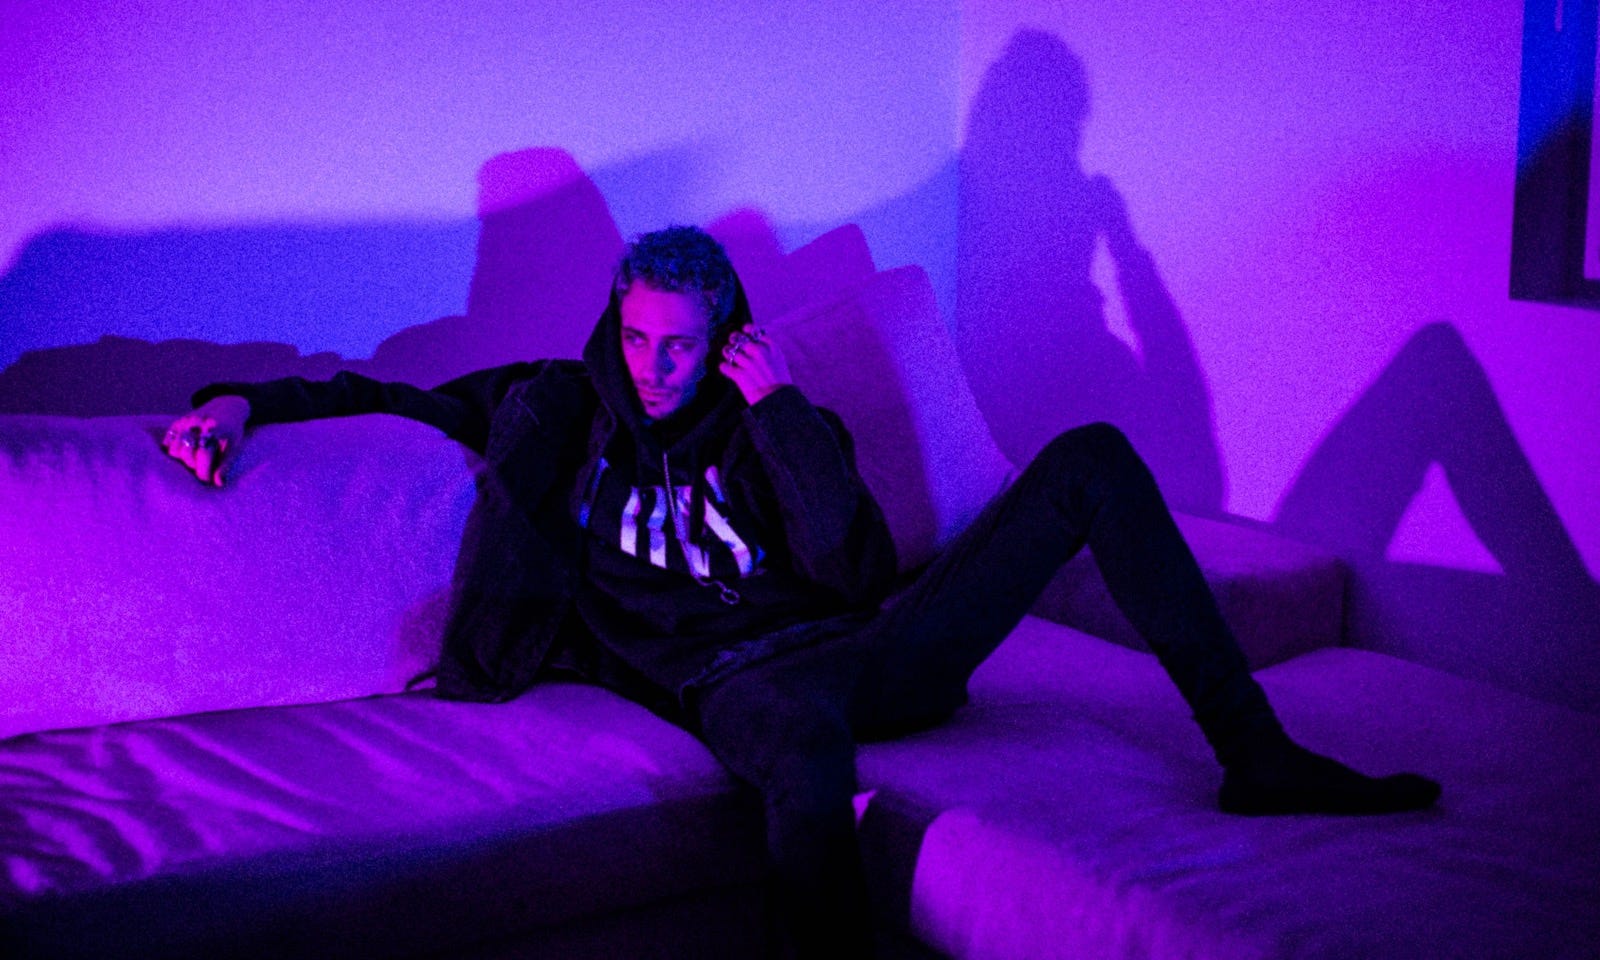 cøzybøy dressed in all black sitting on a sofa in front of a moody purple and blue background.